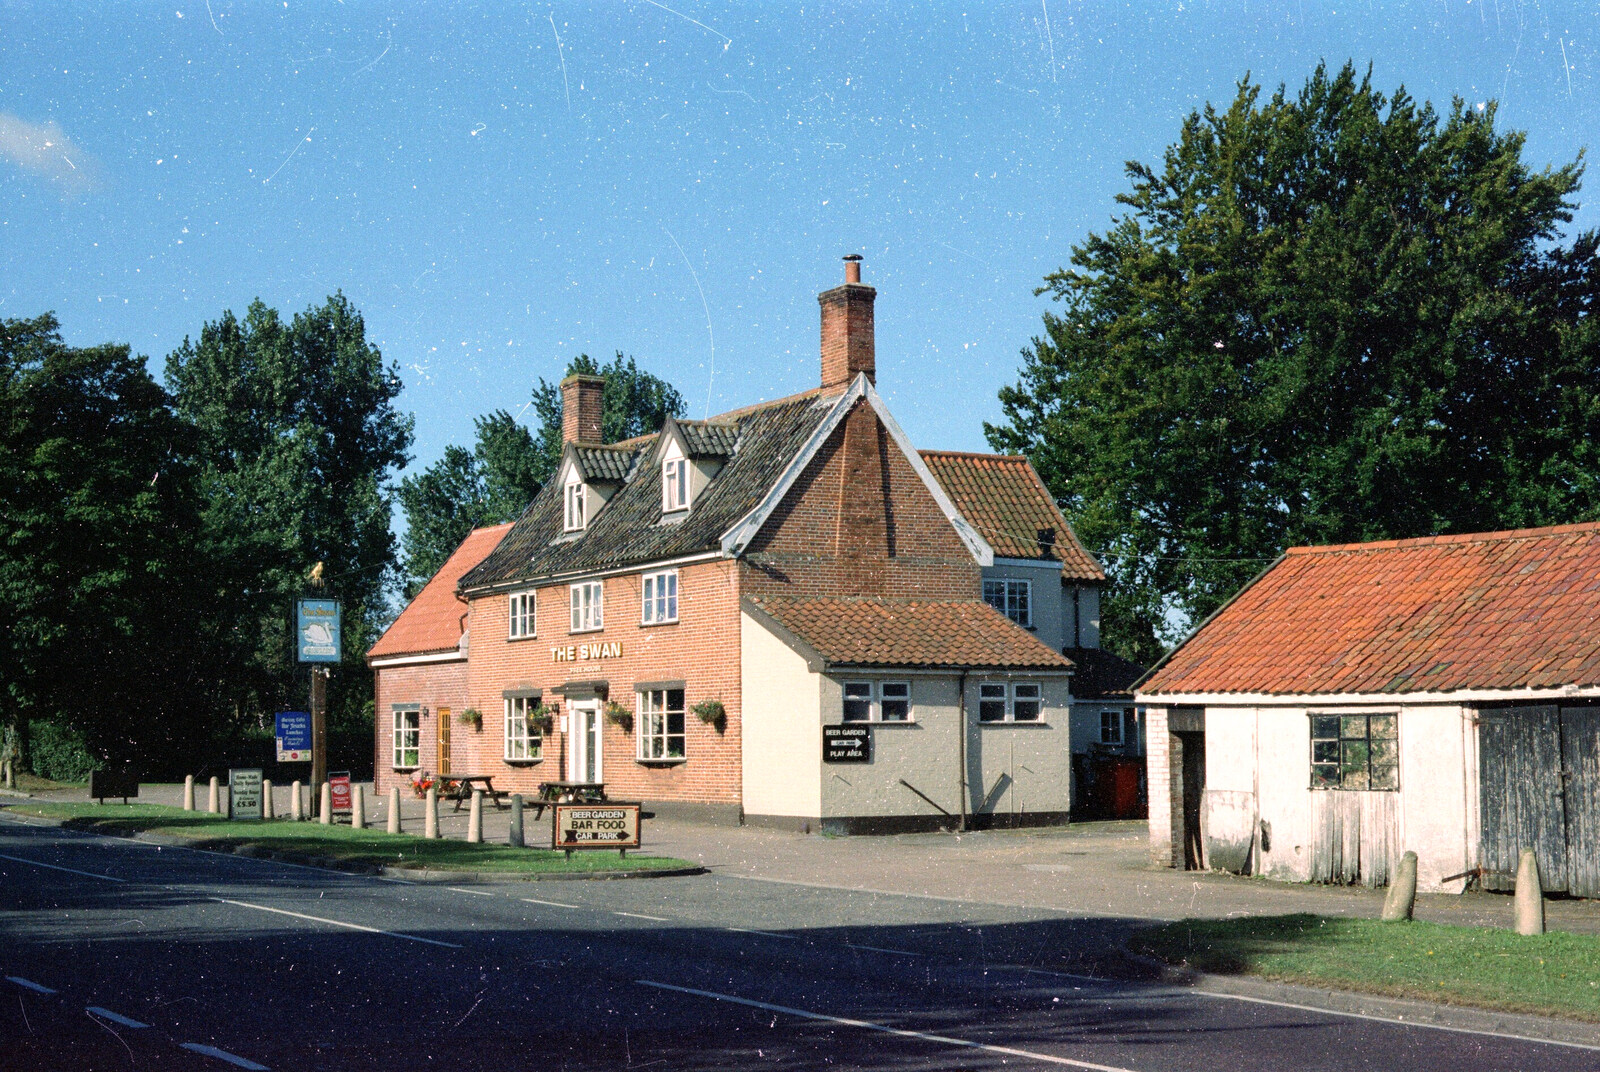 Off-Roading and Photos of The Swan, Brome, Suffolk - 20th May 1995: The Swan Inn at Brome, from the Norwich side